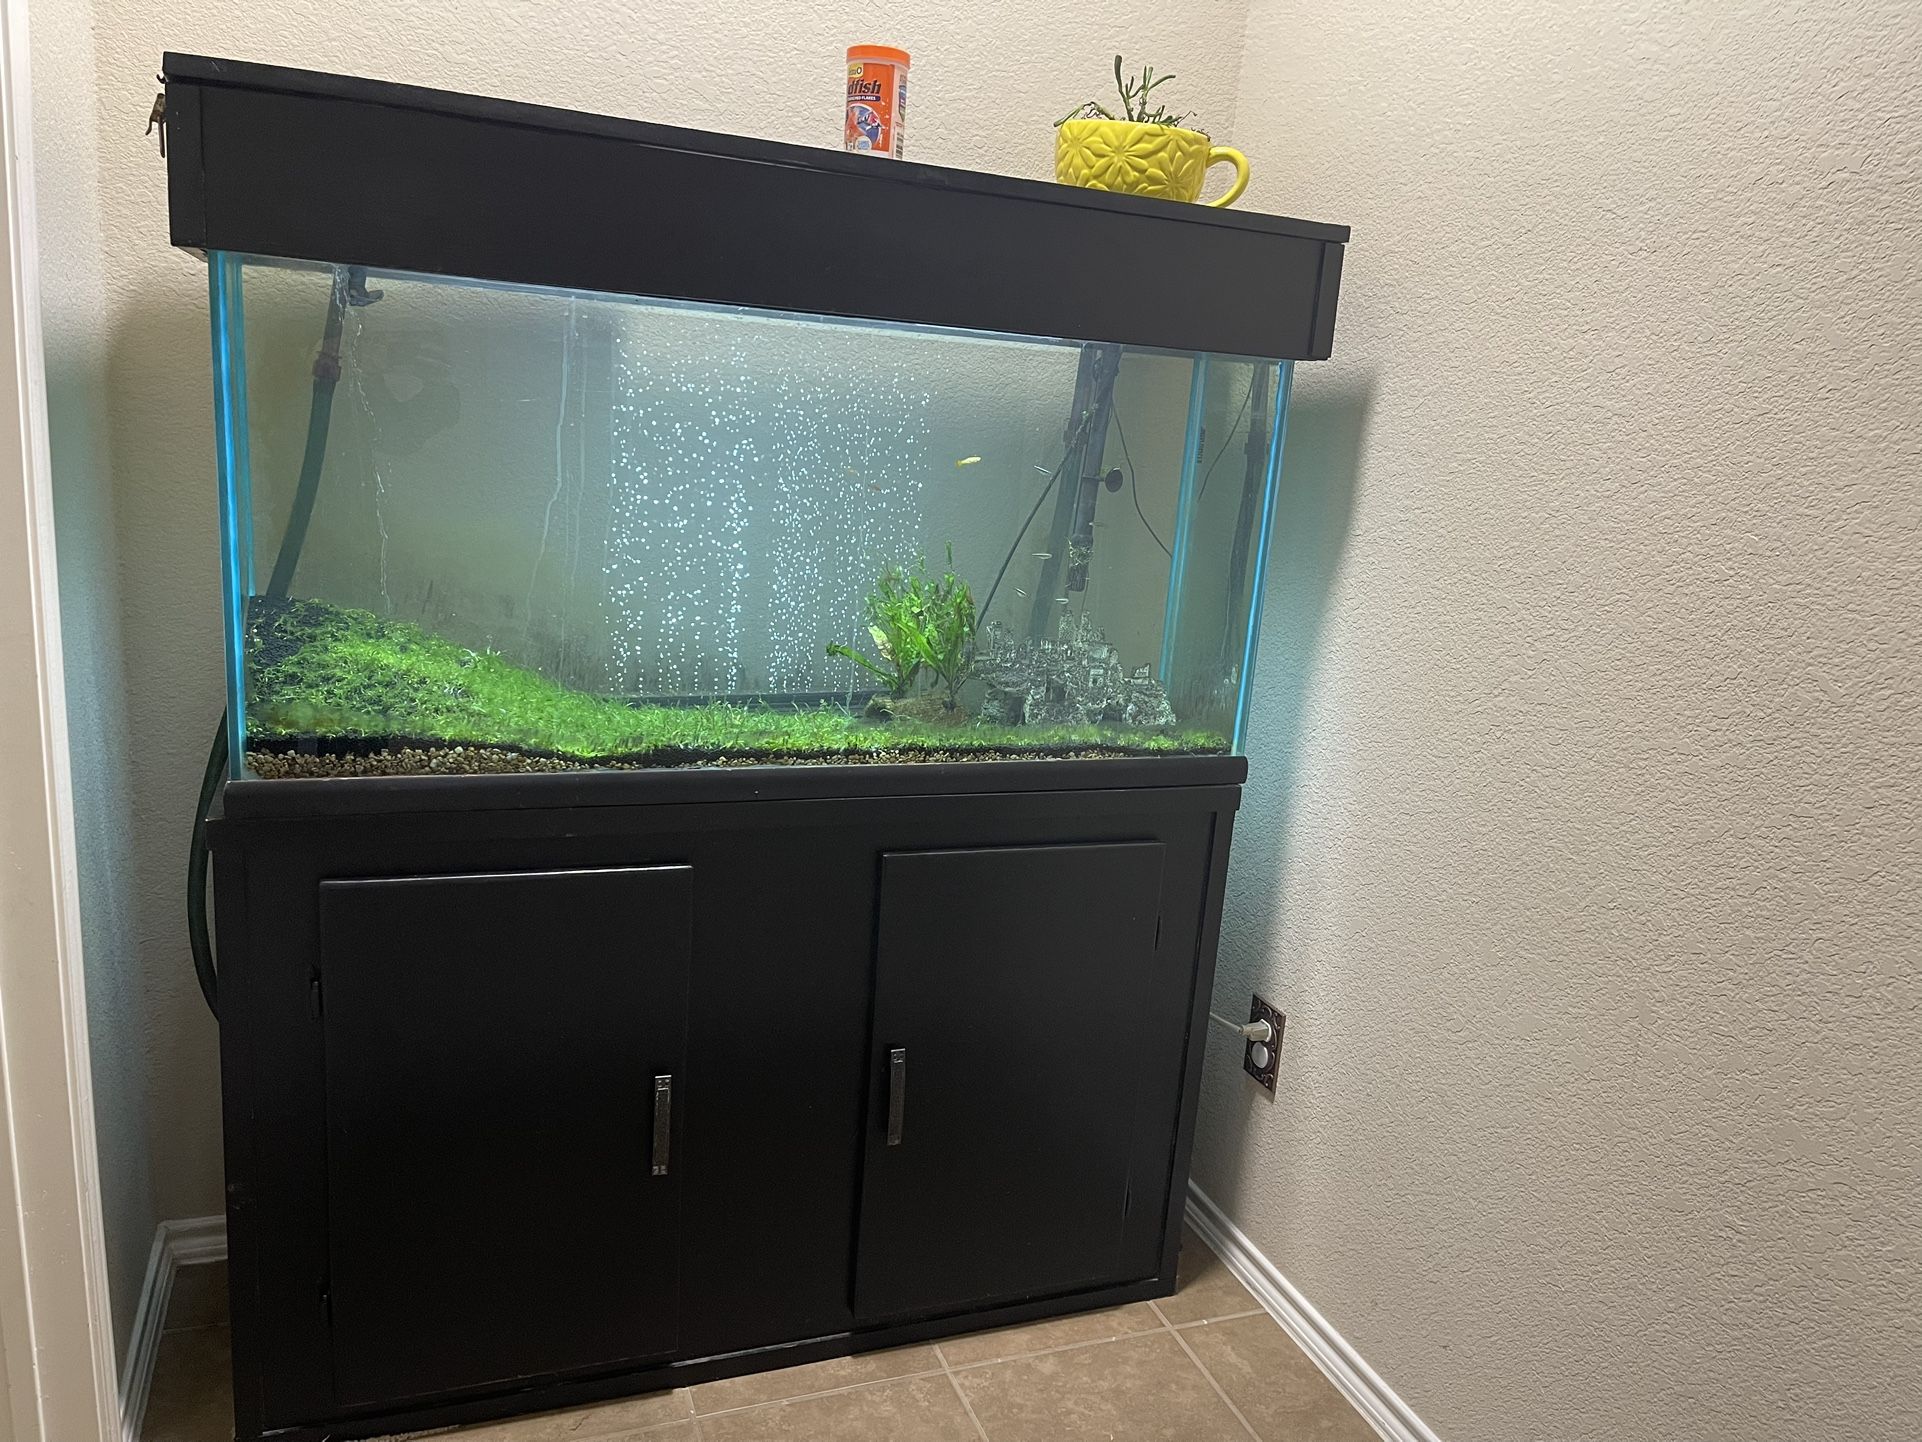 55 Gallons Aquarium ( Fish Tank) With Canister, Filter, Electronic Heater, Air Pump Etc.